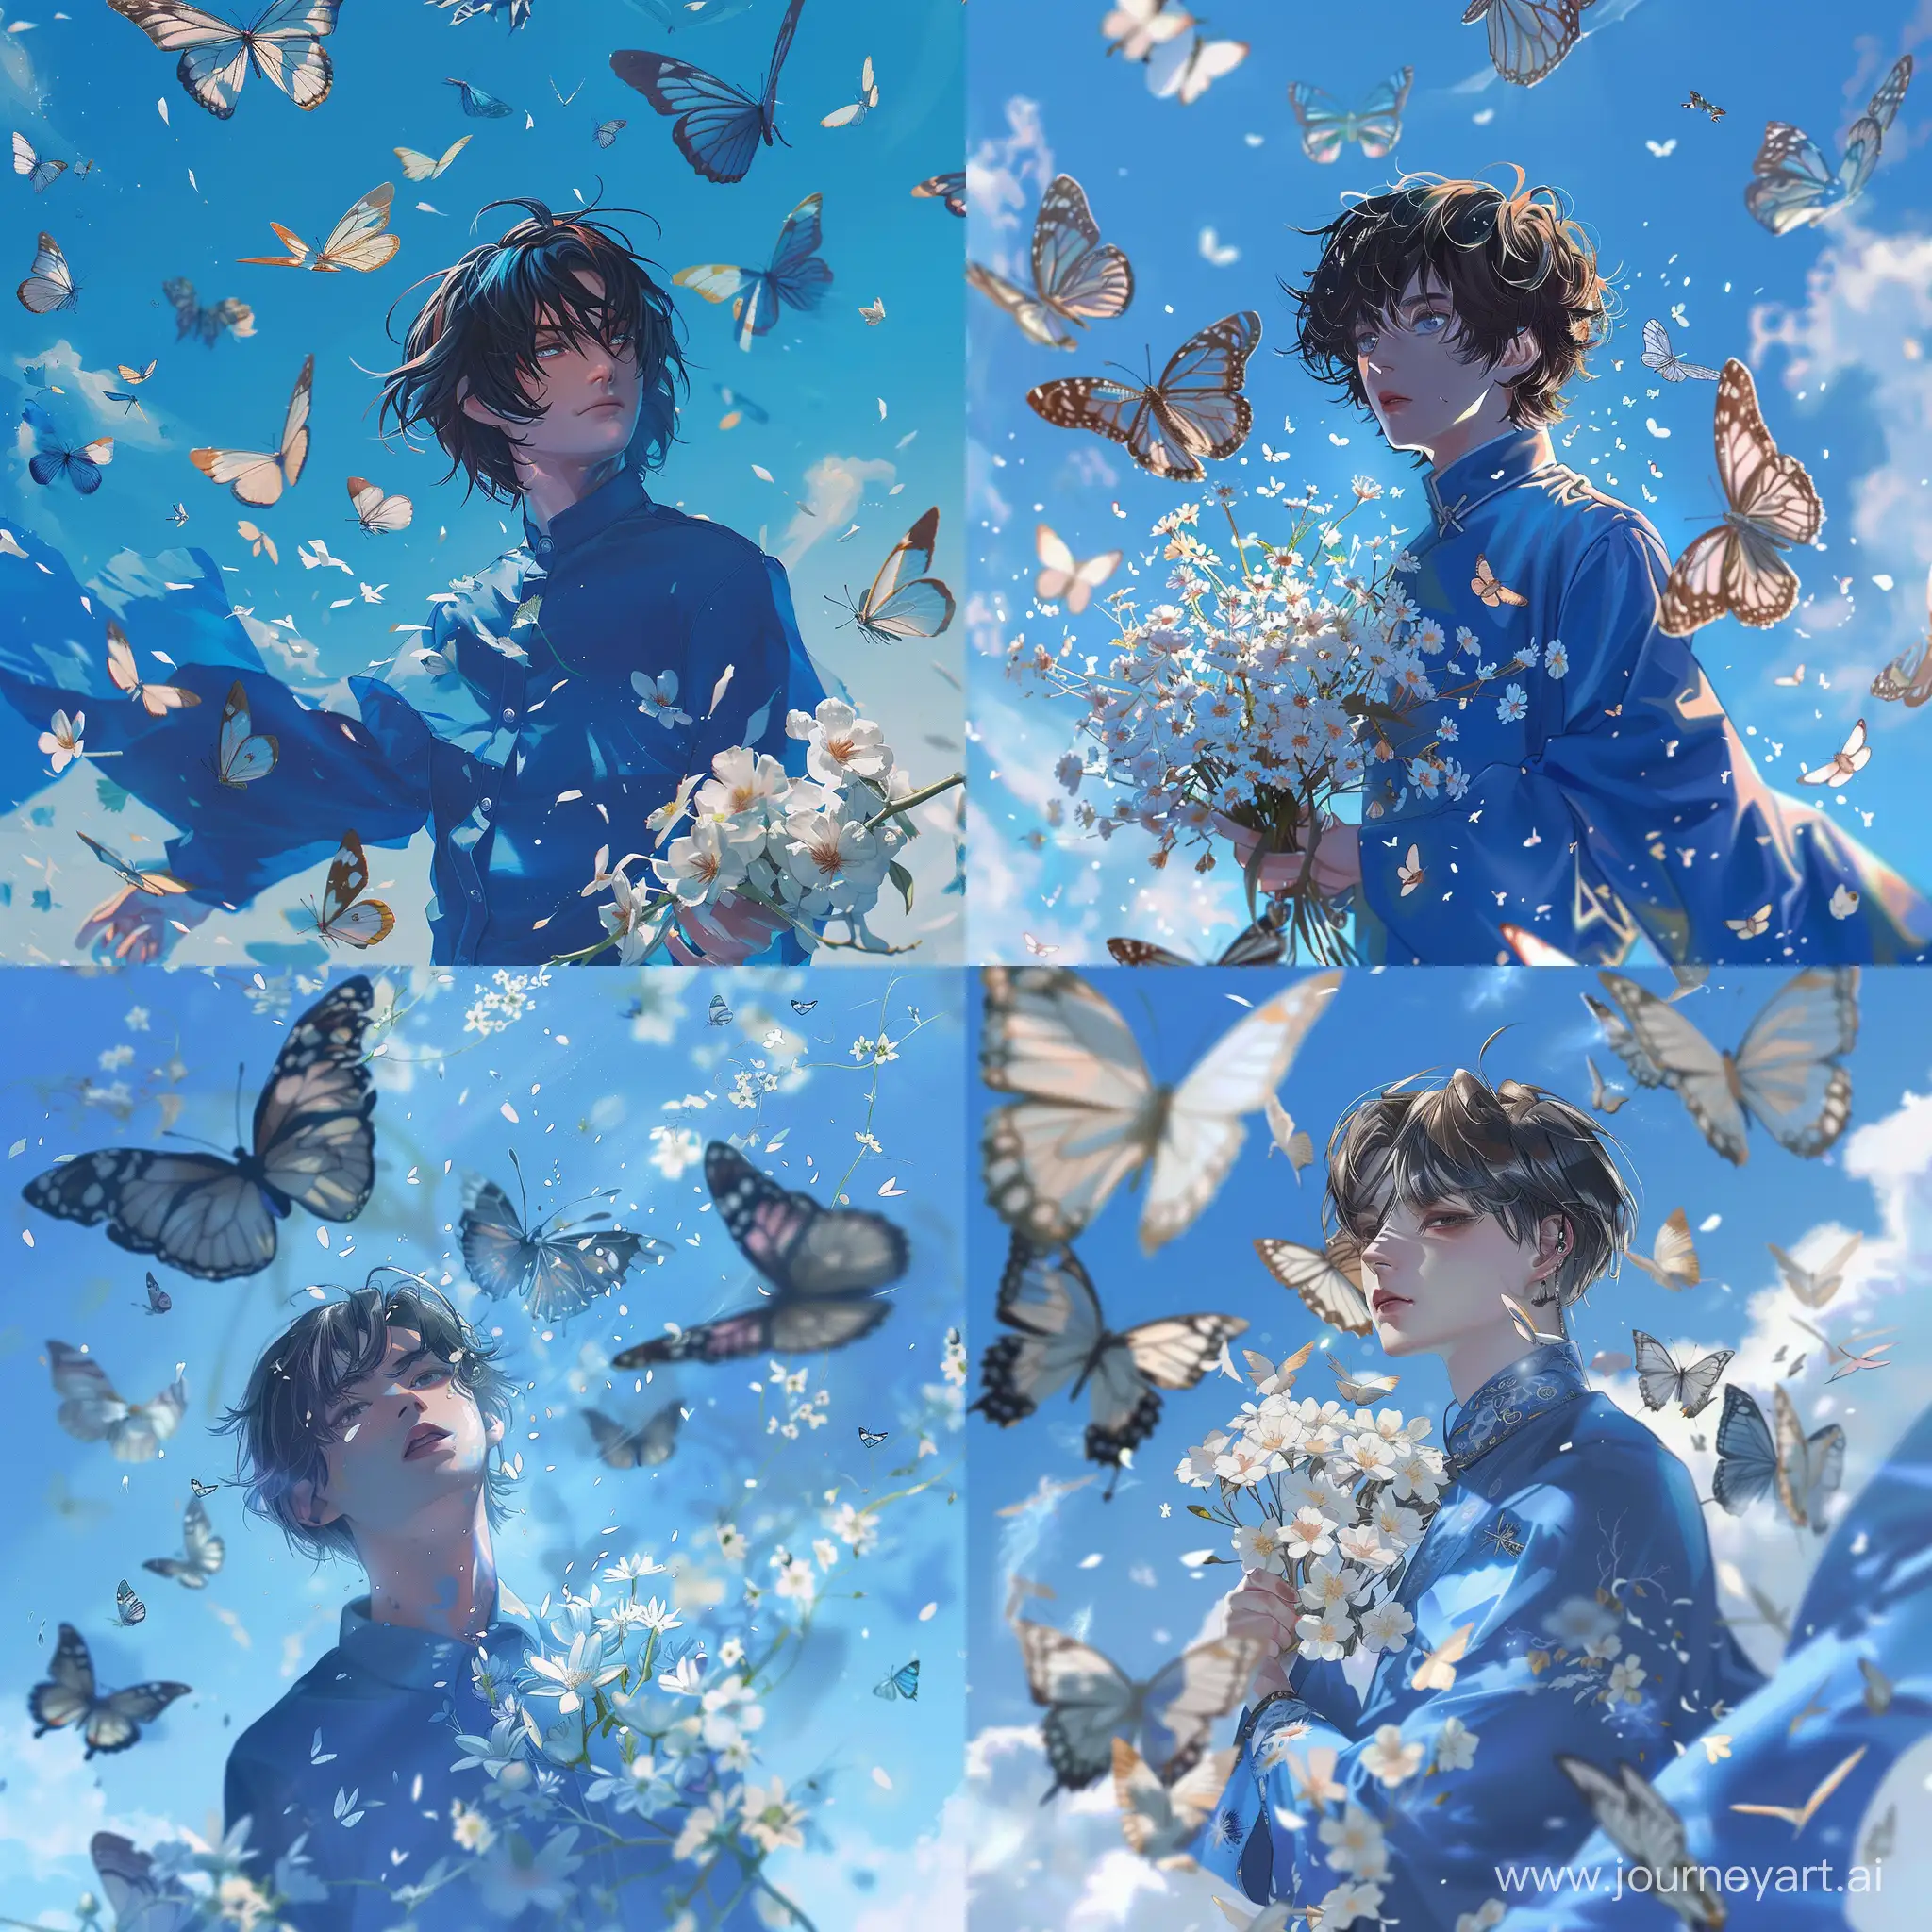 Anime-Man-Amidst-Majestic-Butterflies-with-White-Flowers-in-Blue-Sky